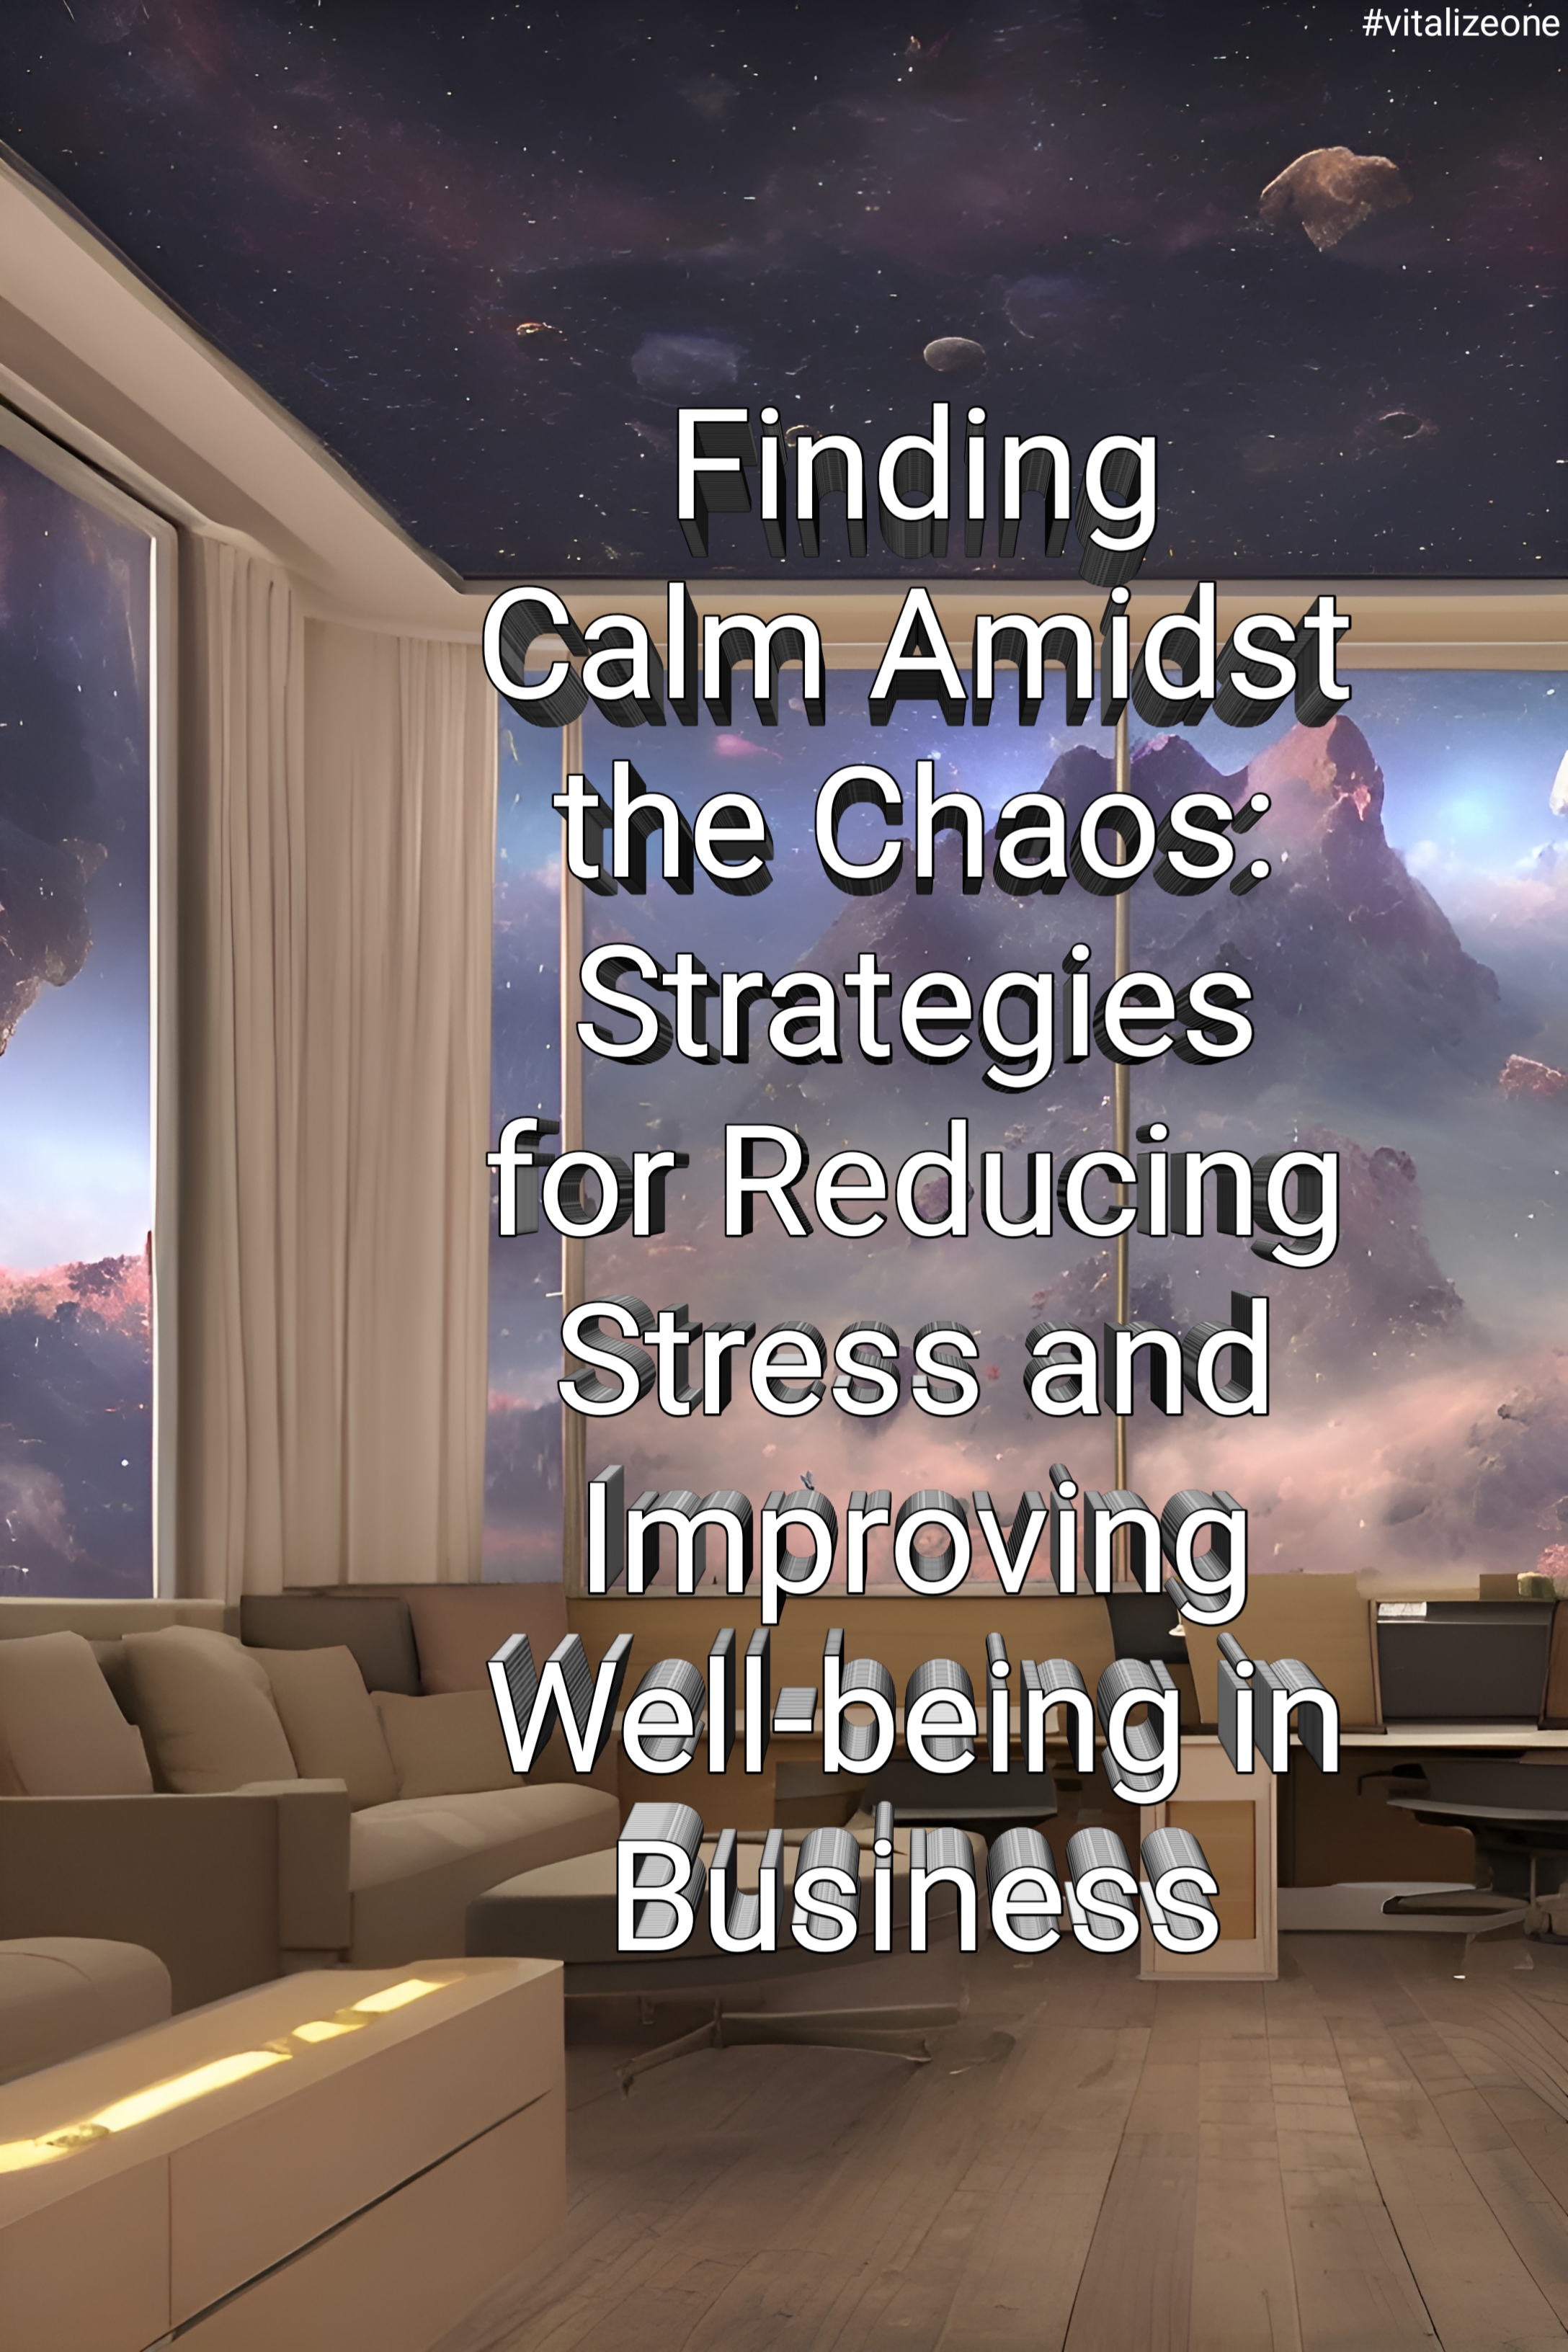 Finding Calm Amidst the Chaos: Strategies for Reducing Stress and Improving Well-being in Business | VitalyTennant.com | #vitalizeone 3